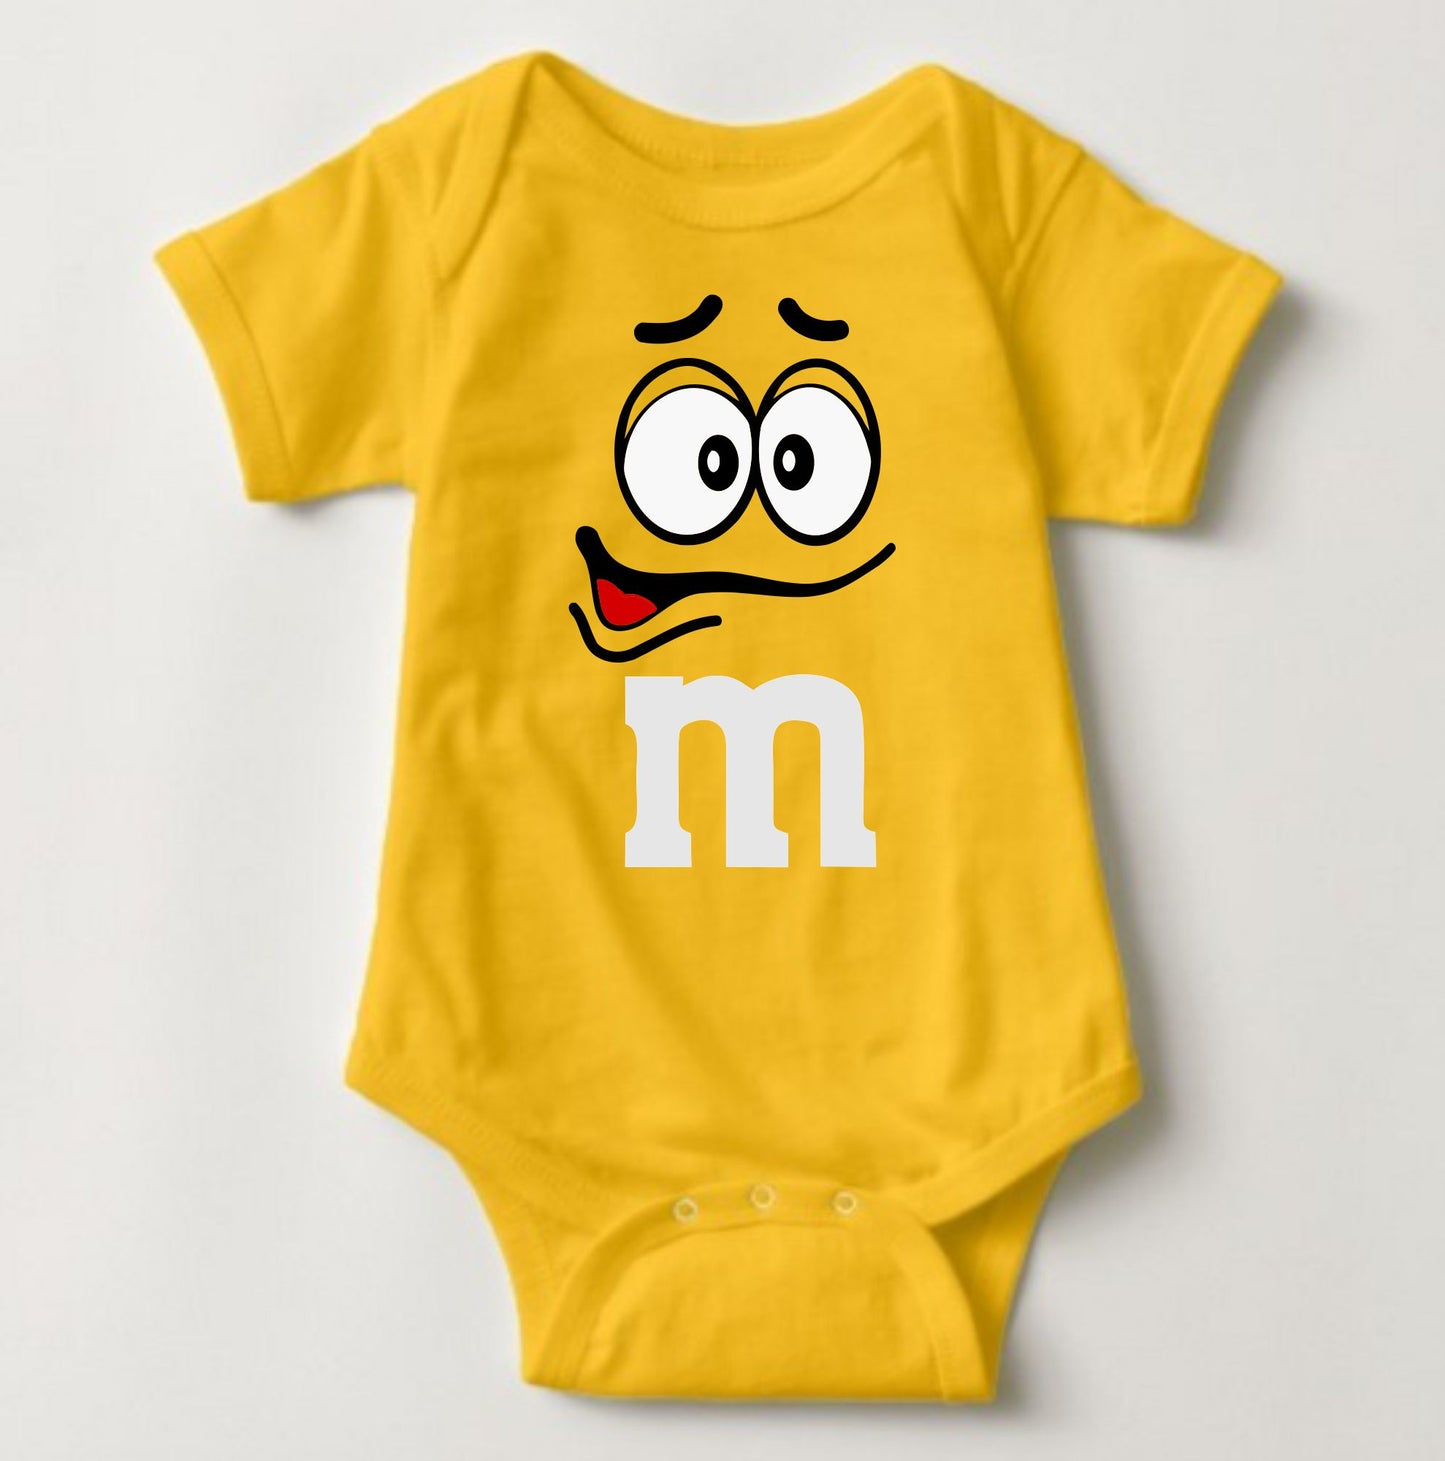 Baby Character Onesies - M&M's Yellow - MYSTYLEMYCLOTHING